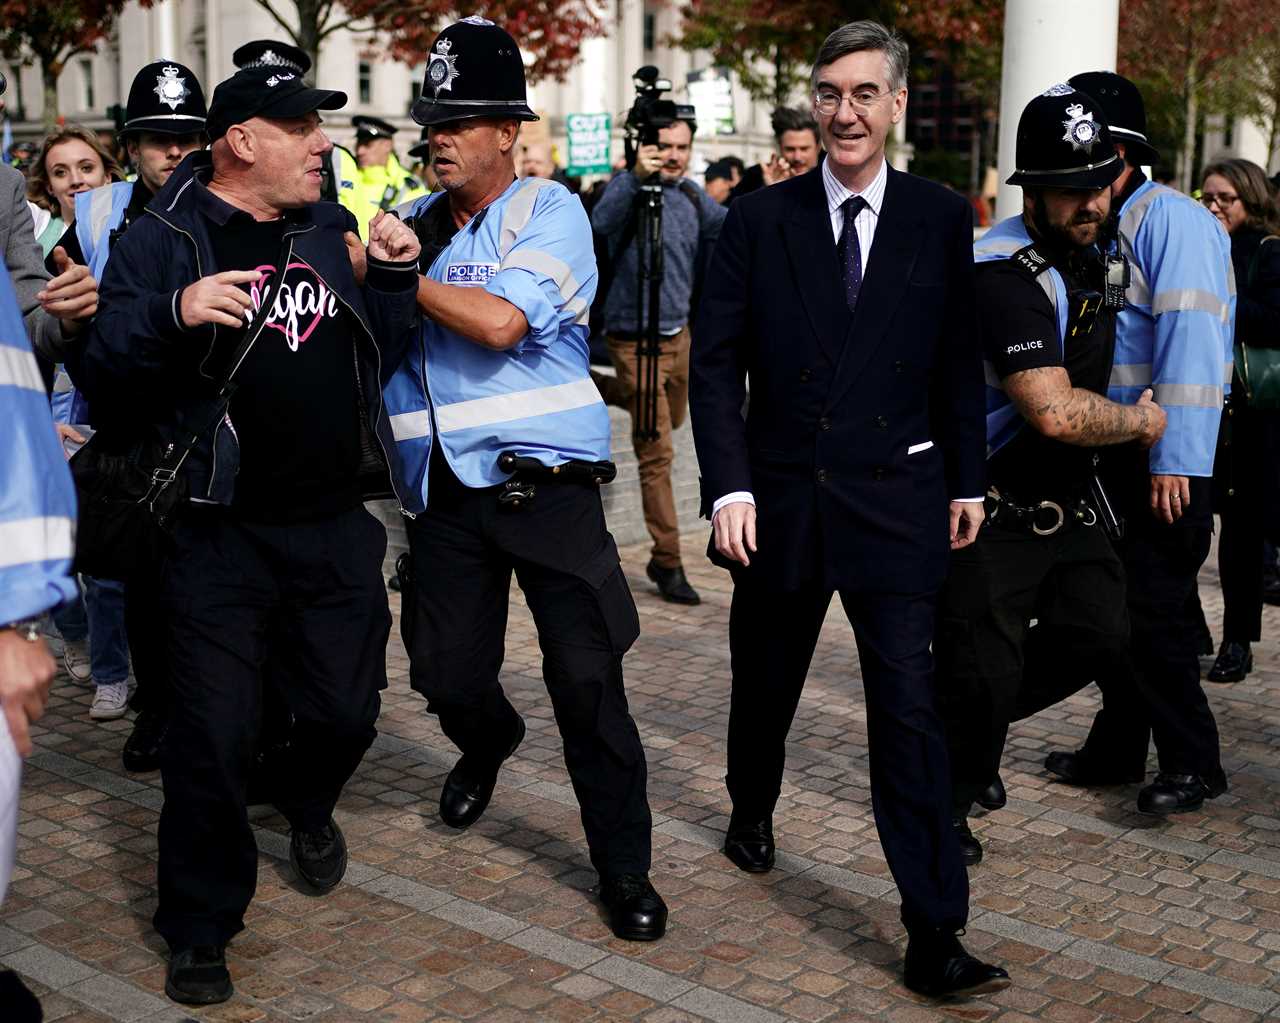 Tory MPs escorted by police while chased and pelted by leftie mob outside party conference in Birmingham